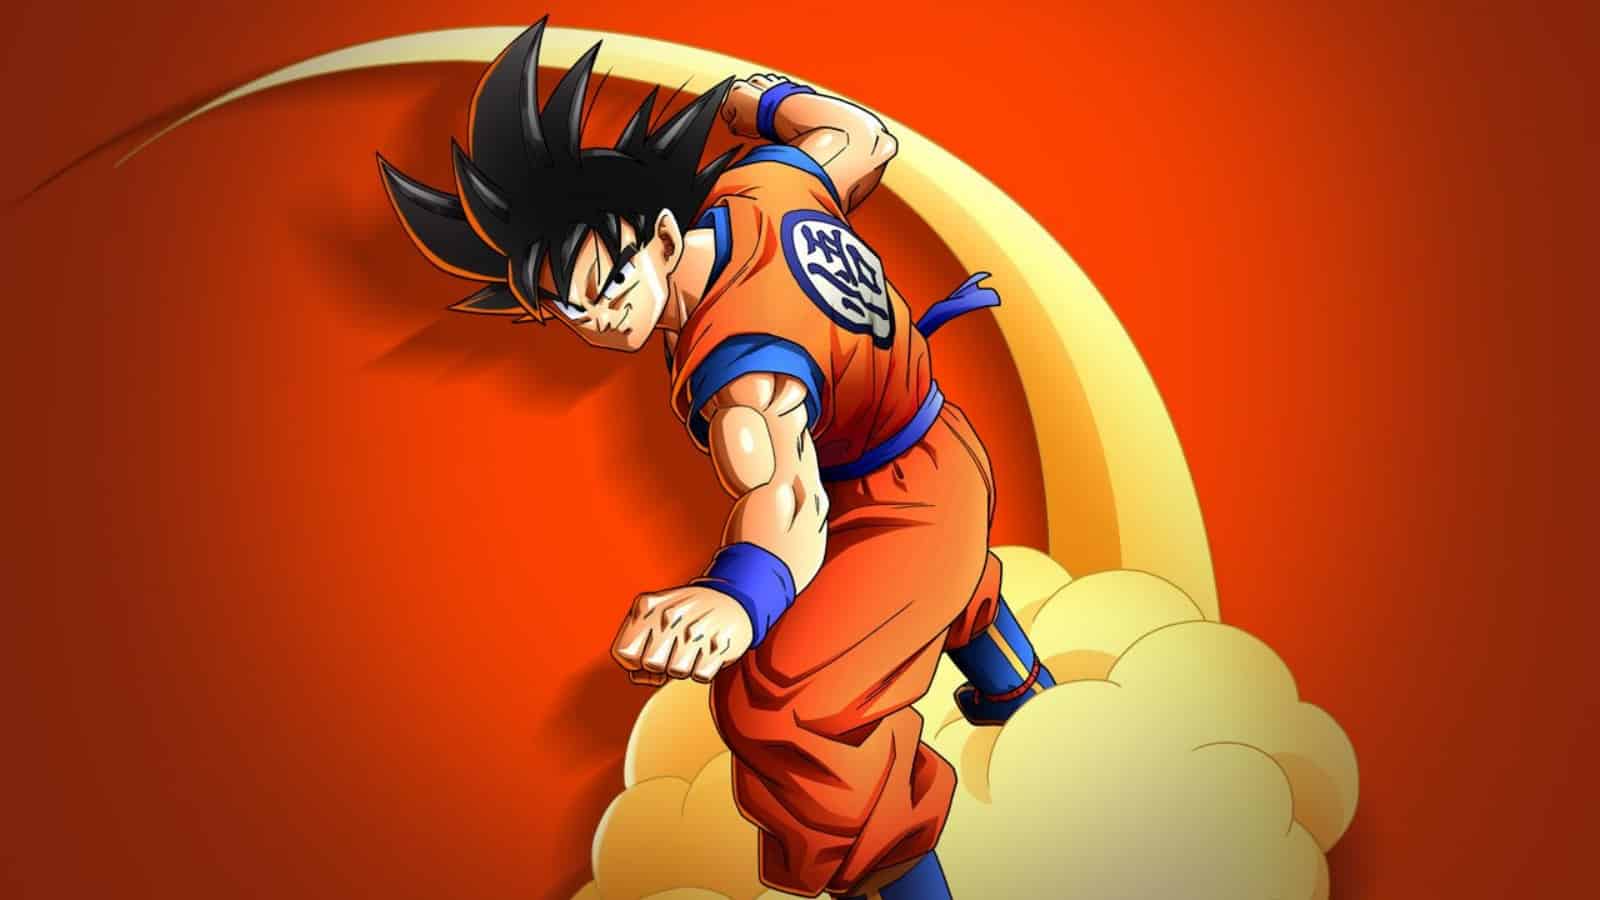 RUMOR: Dragon Ball Z content coming to Fortnite